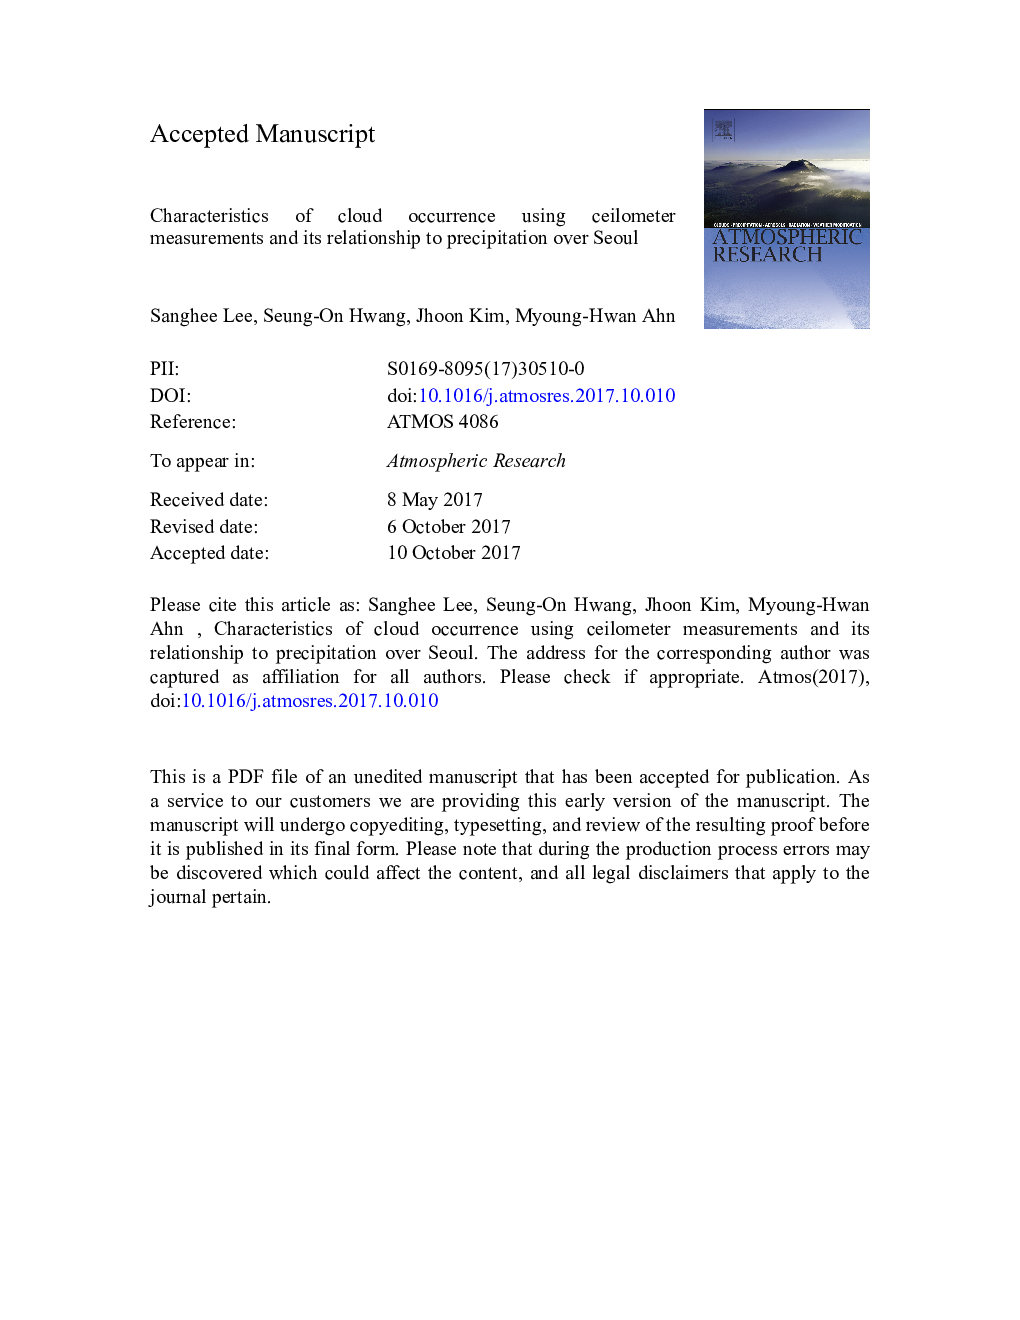 Characteristics of cloud occurrence using ceilometer measurements and its relationship to precipitation over Seoul